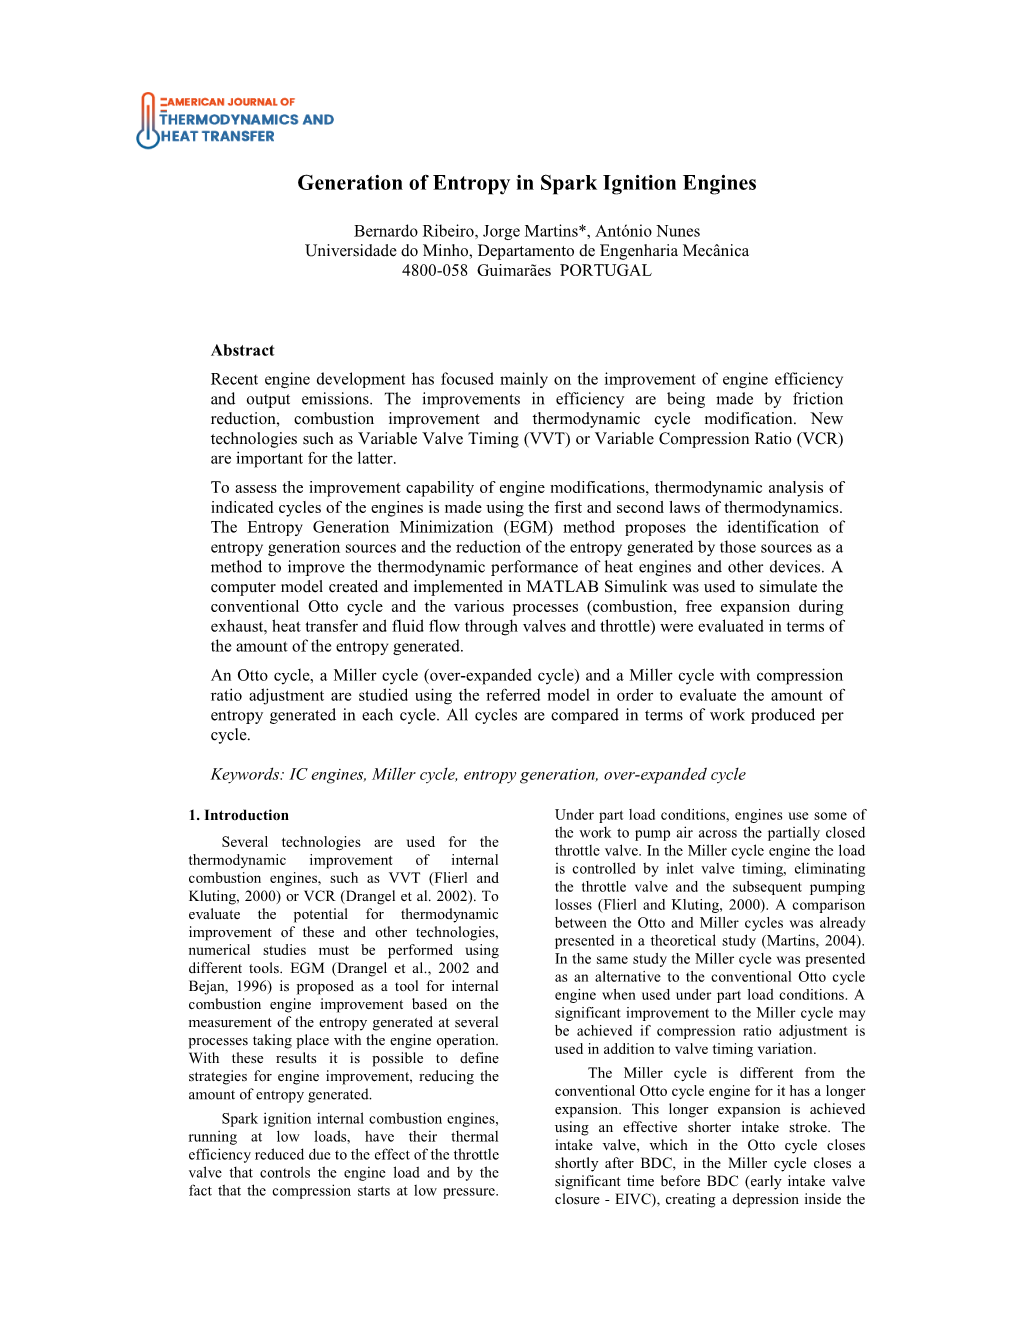 Generation of Entropy in Spark Ignition Engines